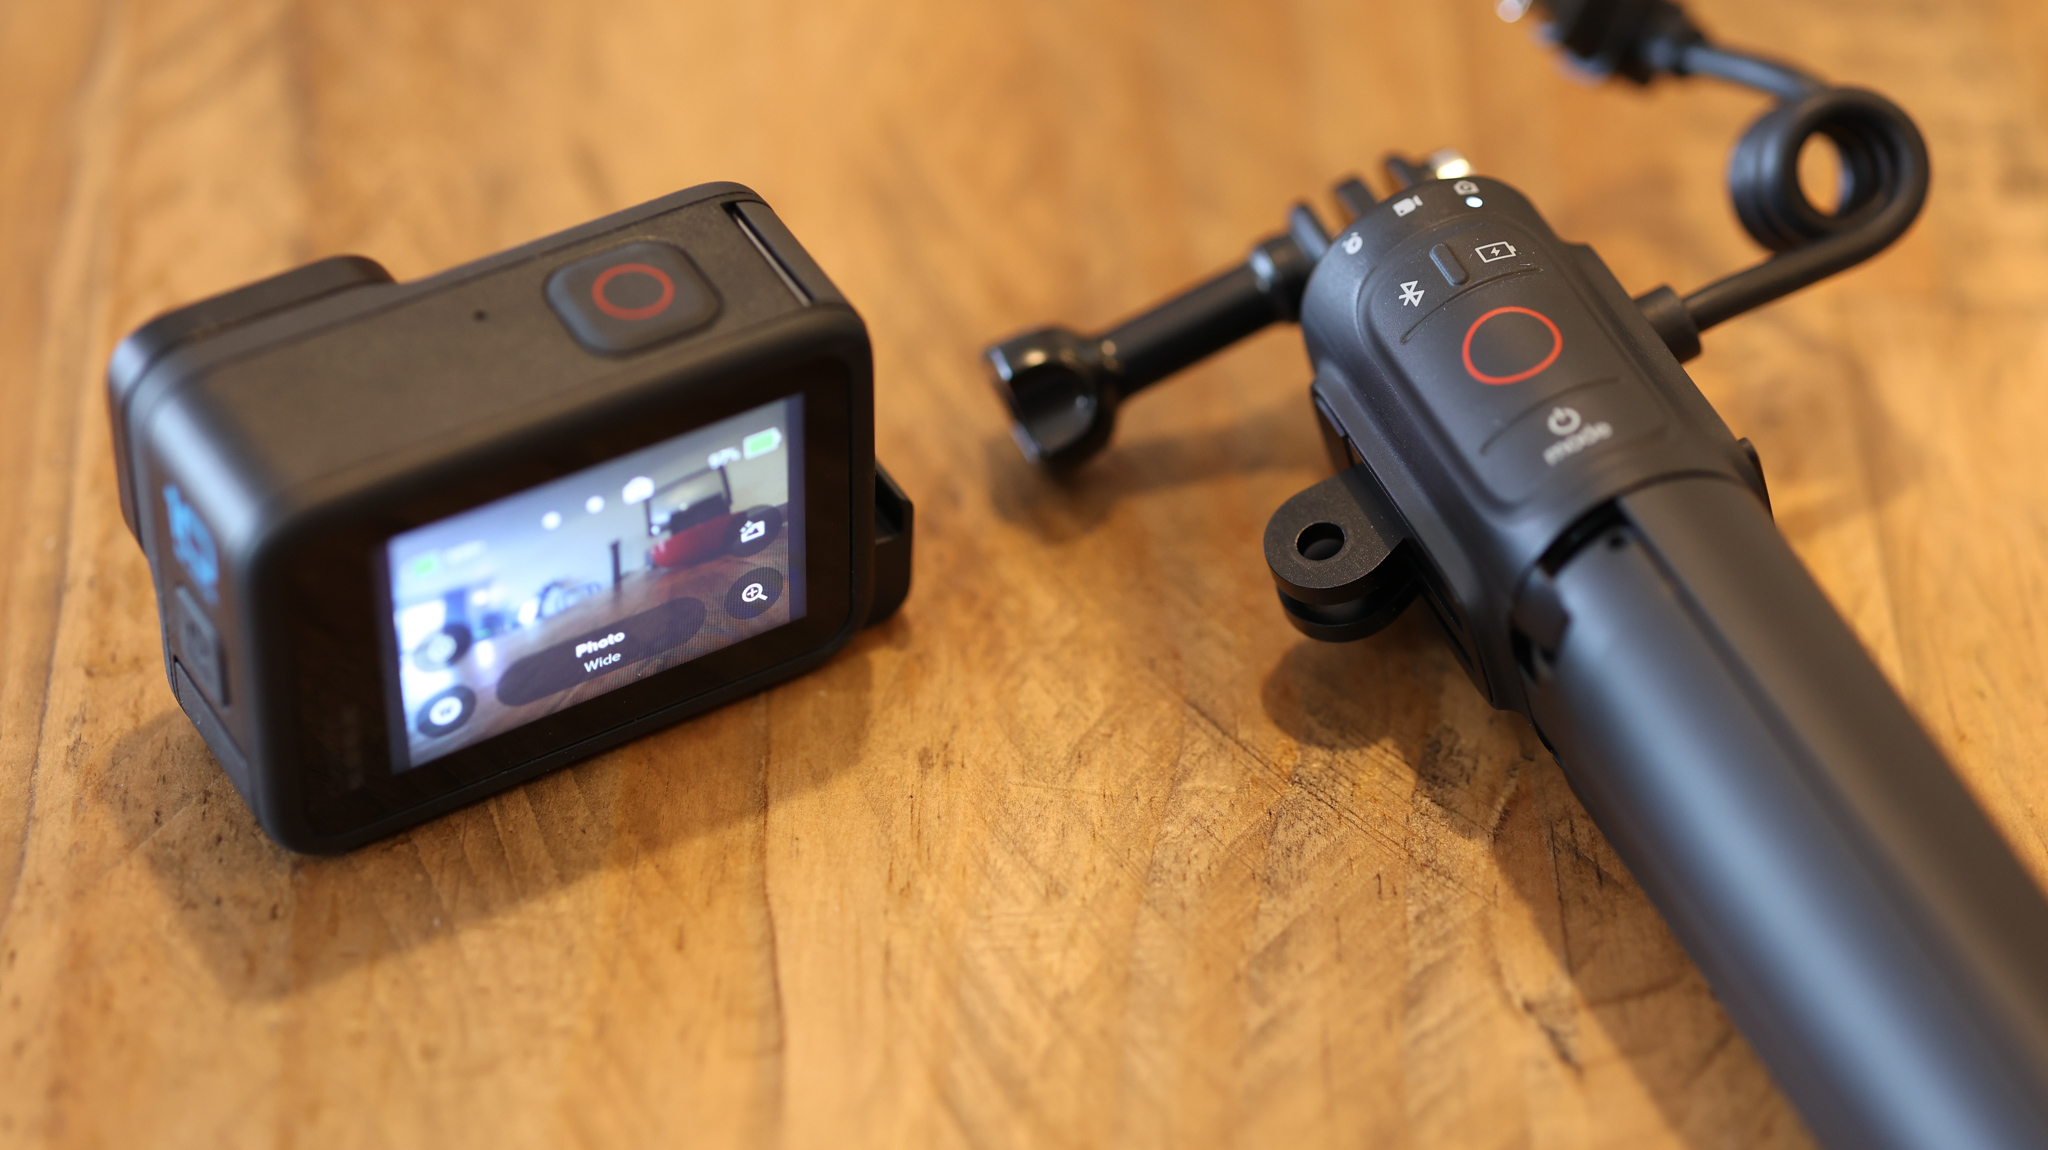 The GoPro Volta tripod grip on a wooden table